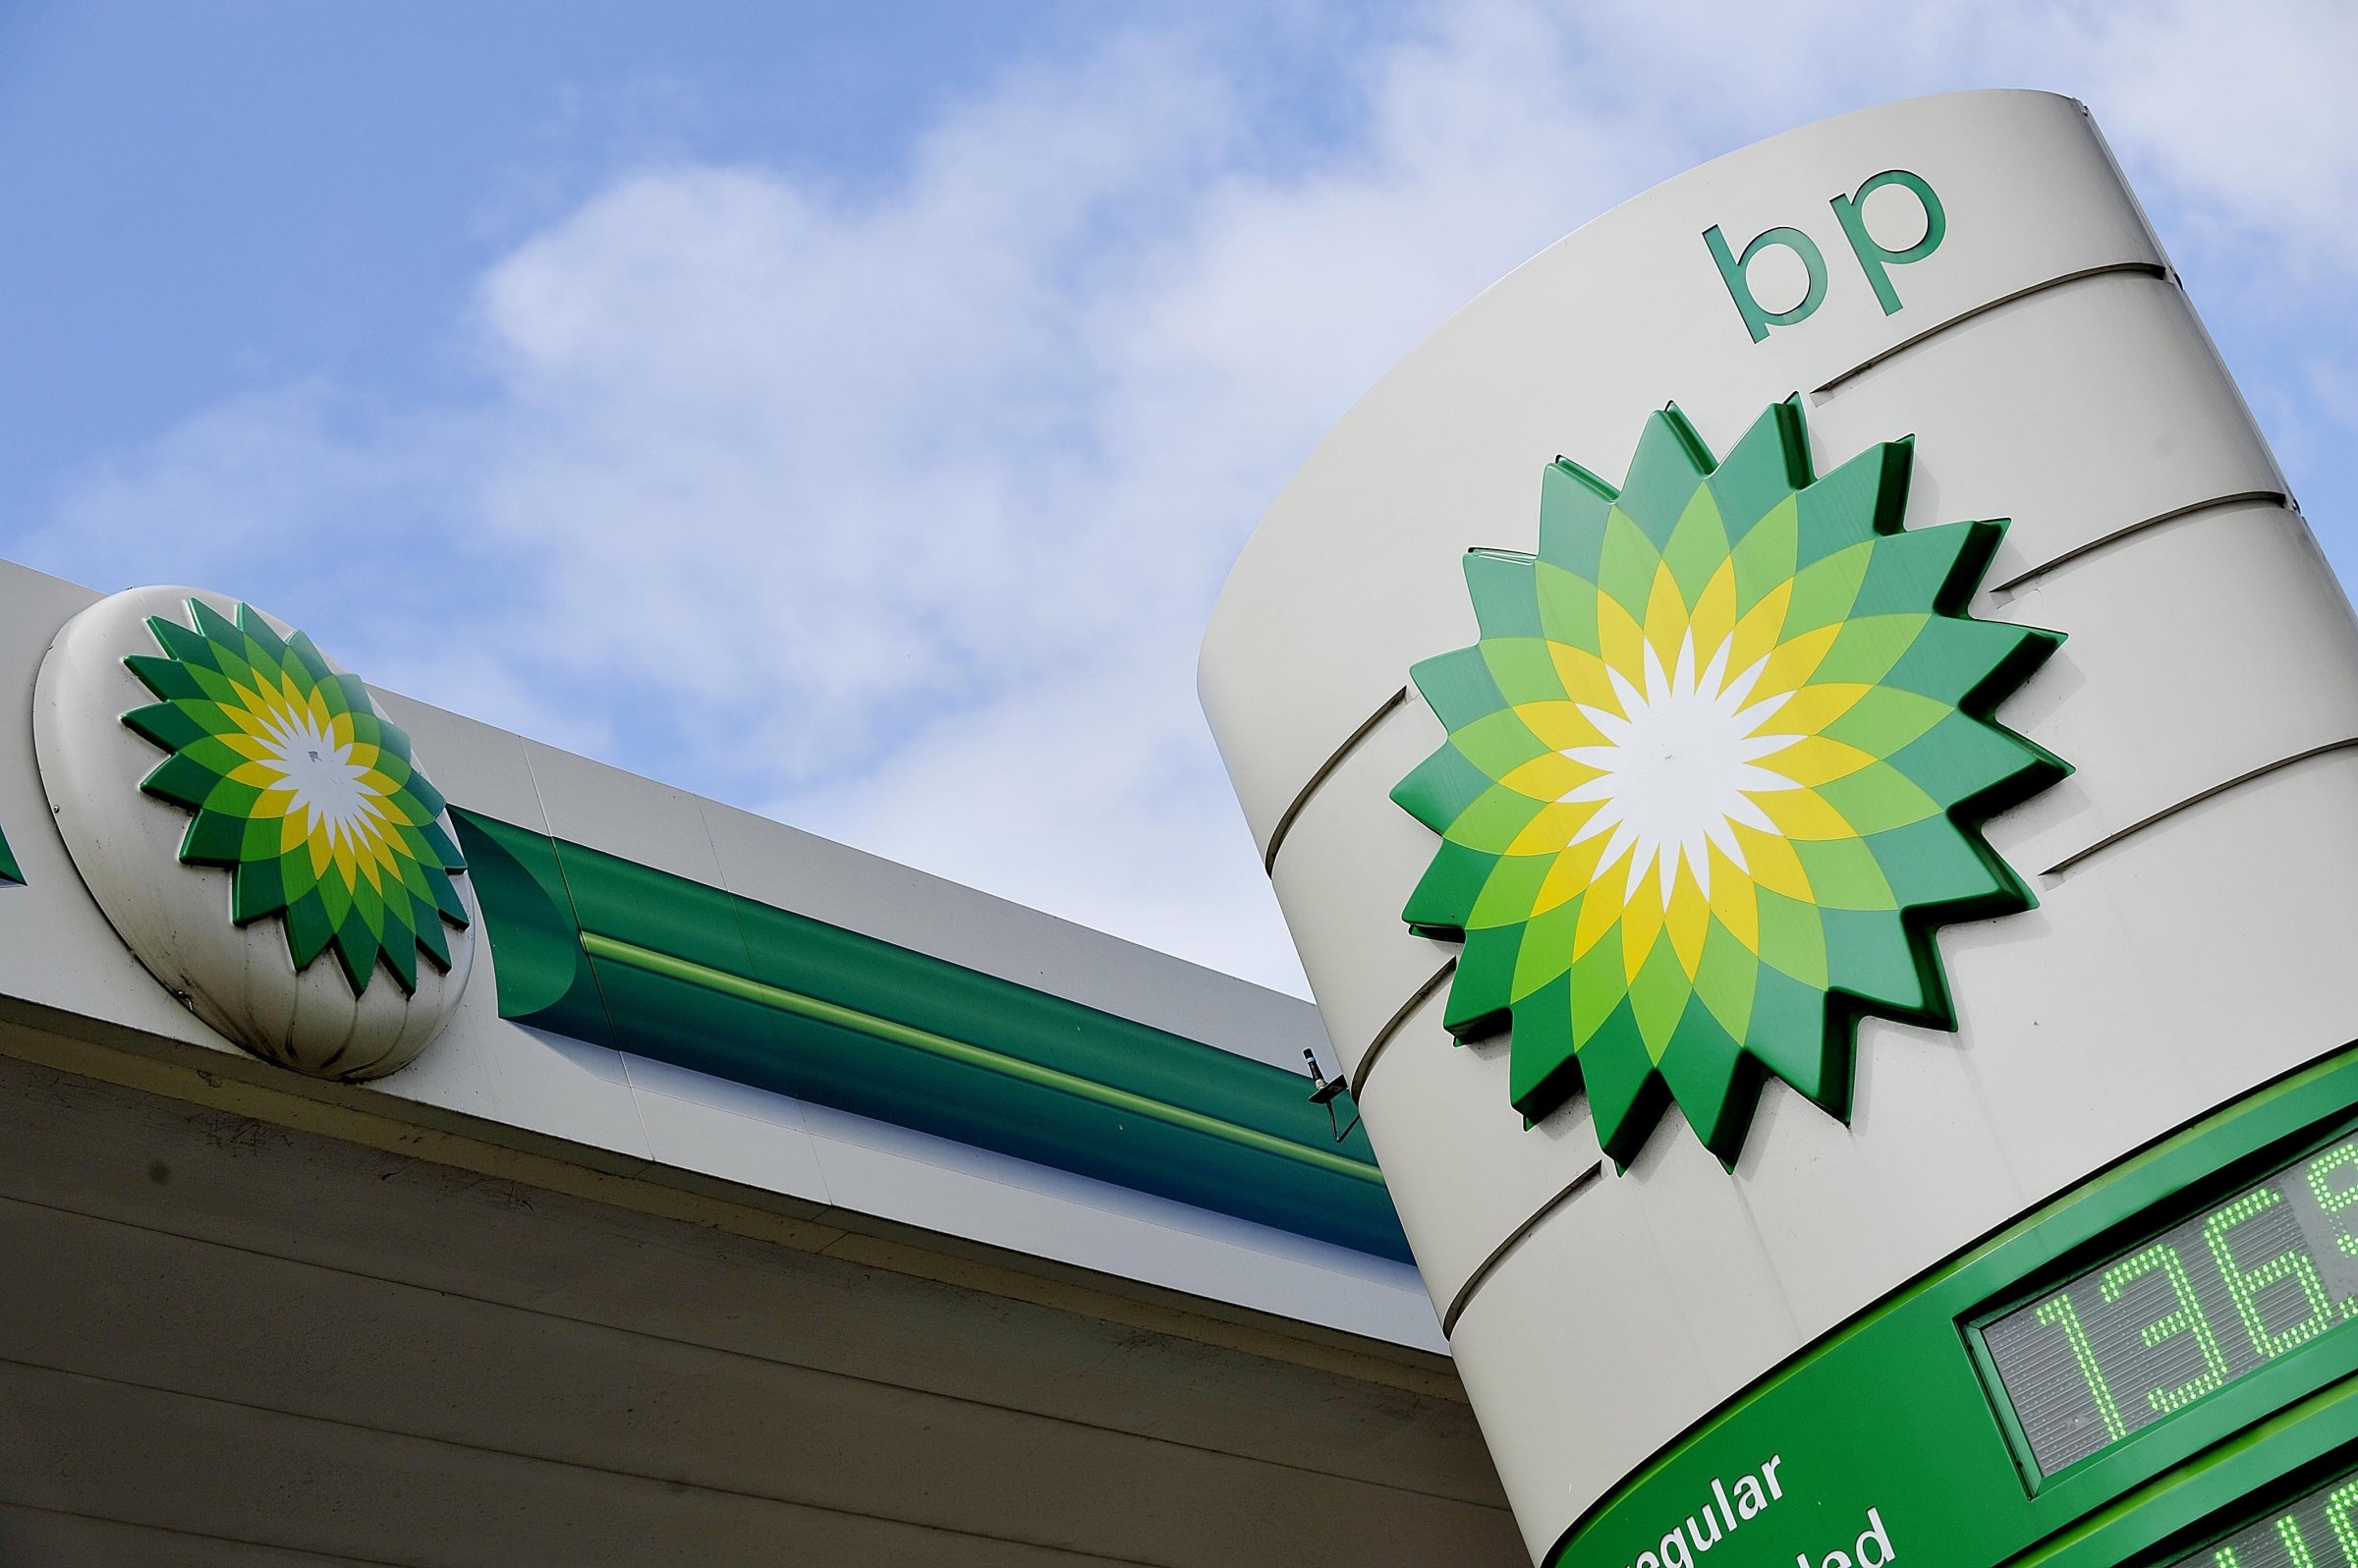 A BP petrol station in London.